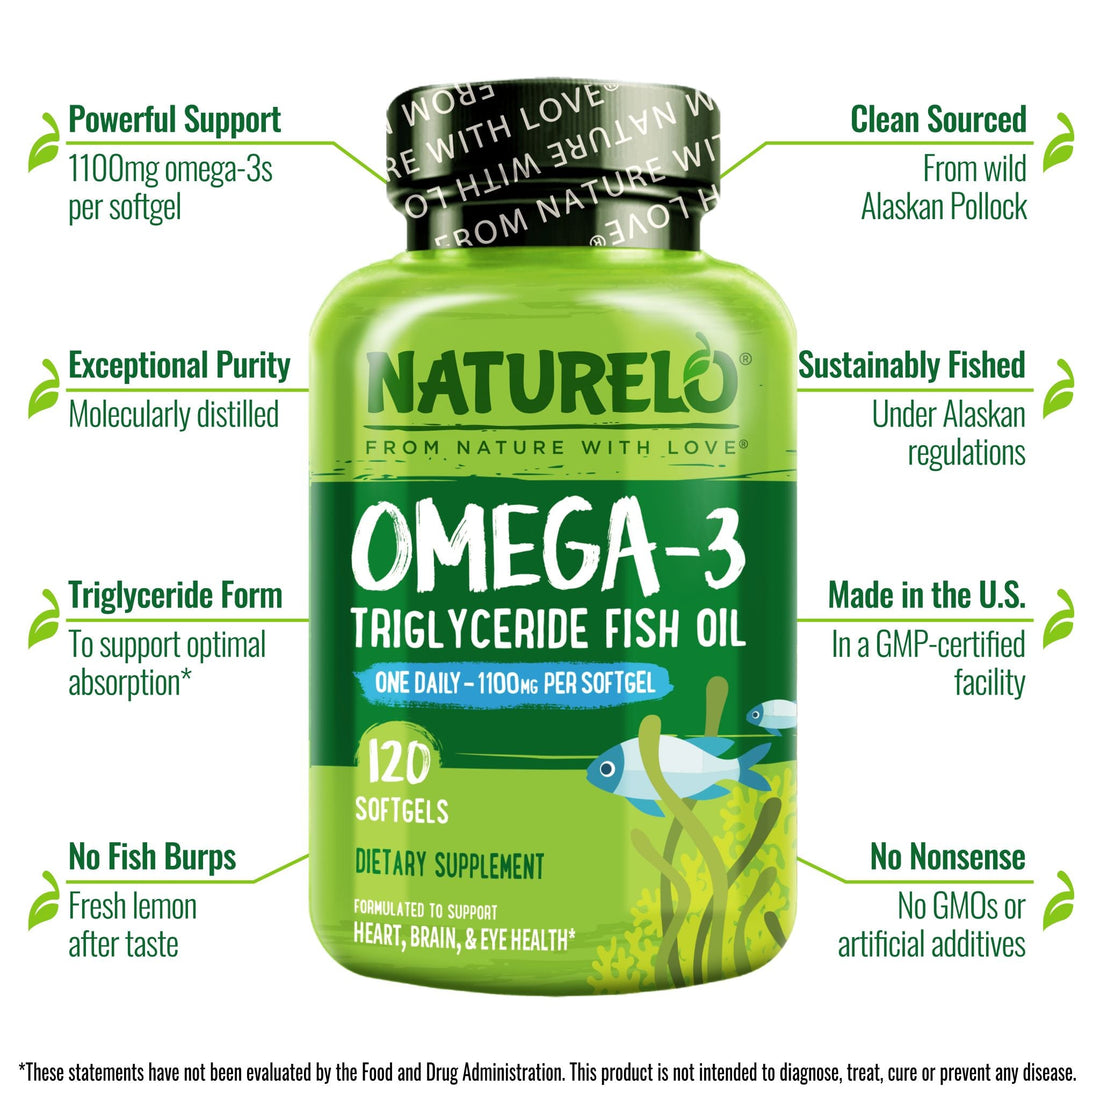 Omega-3 Fish Oil Supplement with Triglyceride Omega-3